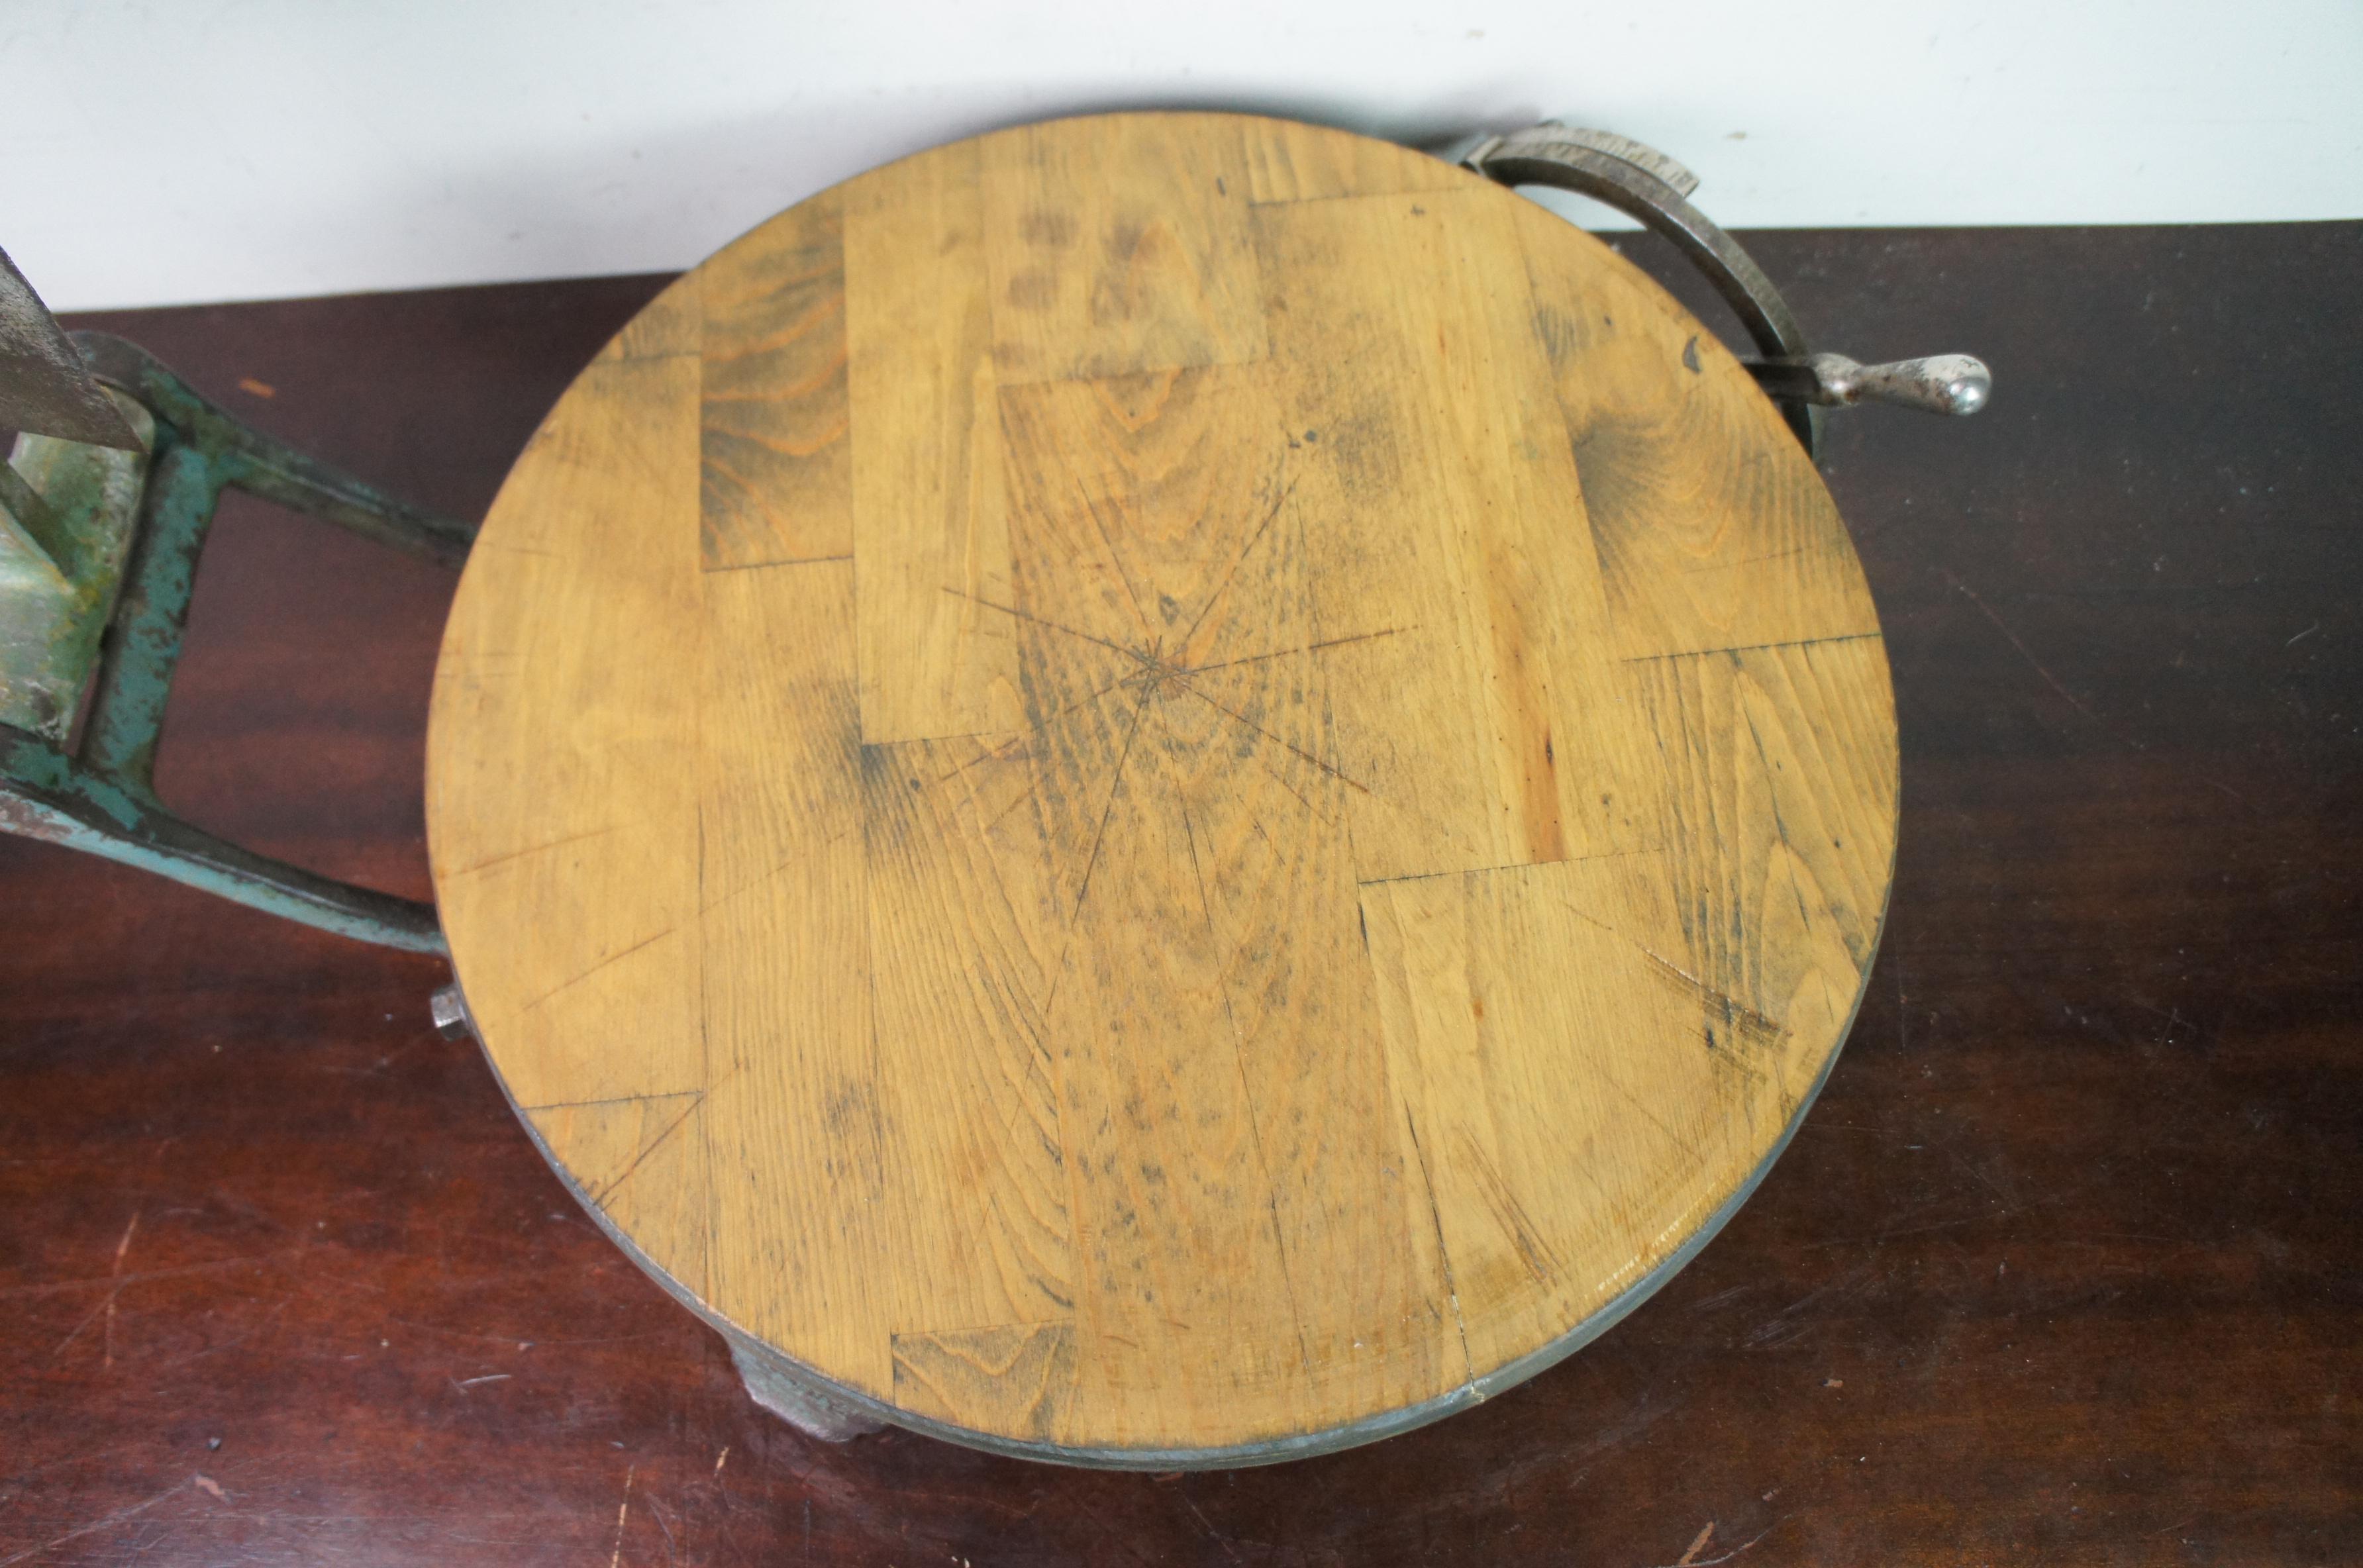 Metal 1904 Antique American Computing Co Perfection Cheese Wheel Cutter Butcher Block